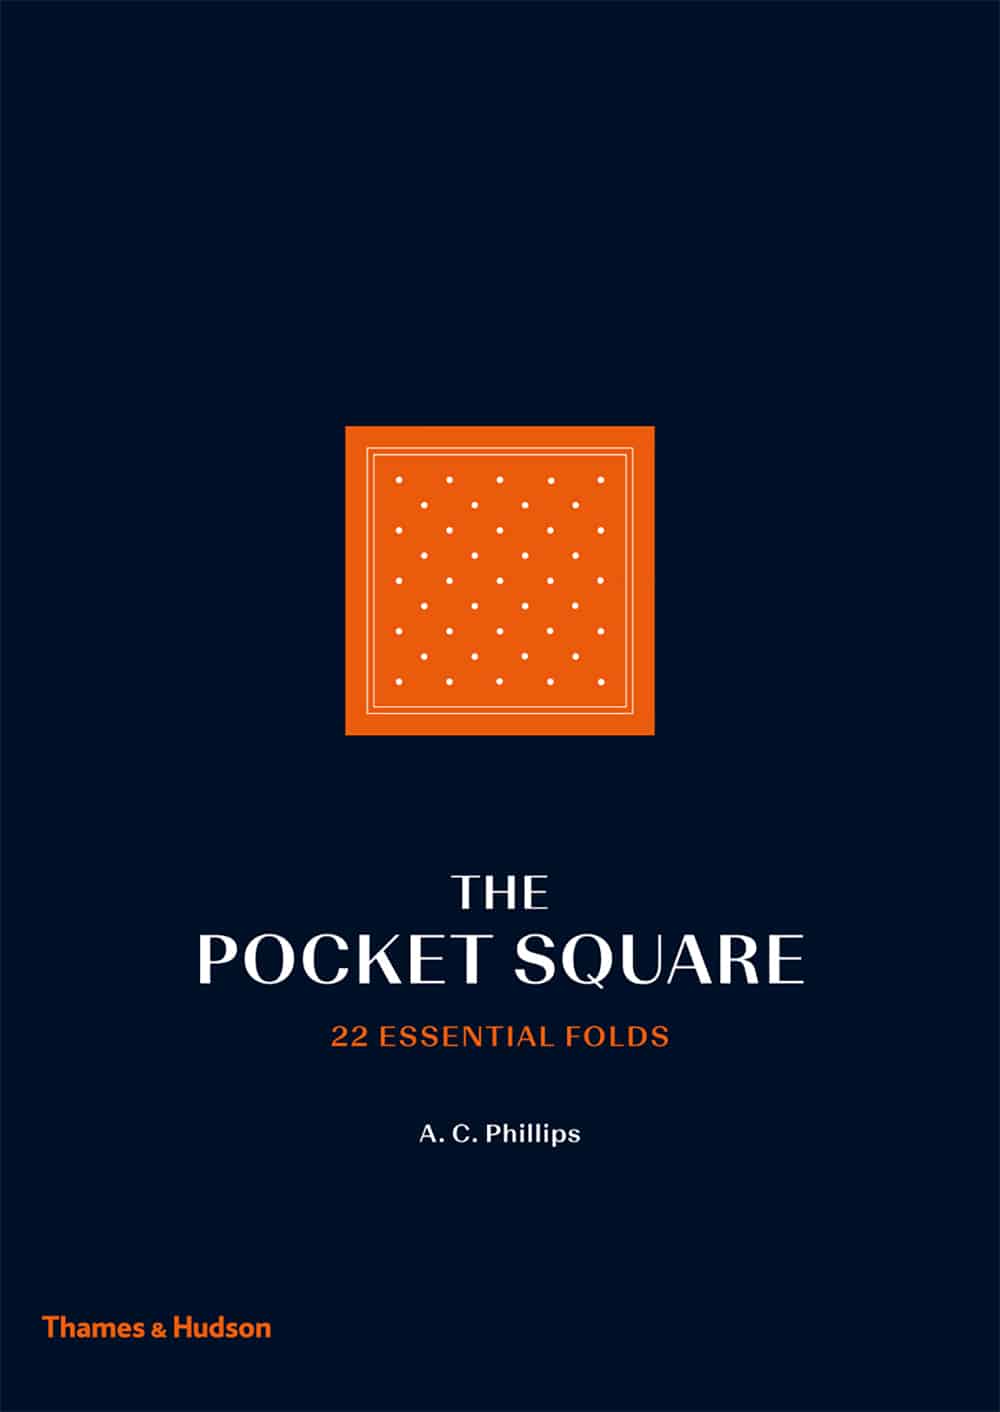 GROOM STYLE: How to fold a pocket square guide from Thames & Hudson.